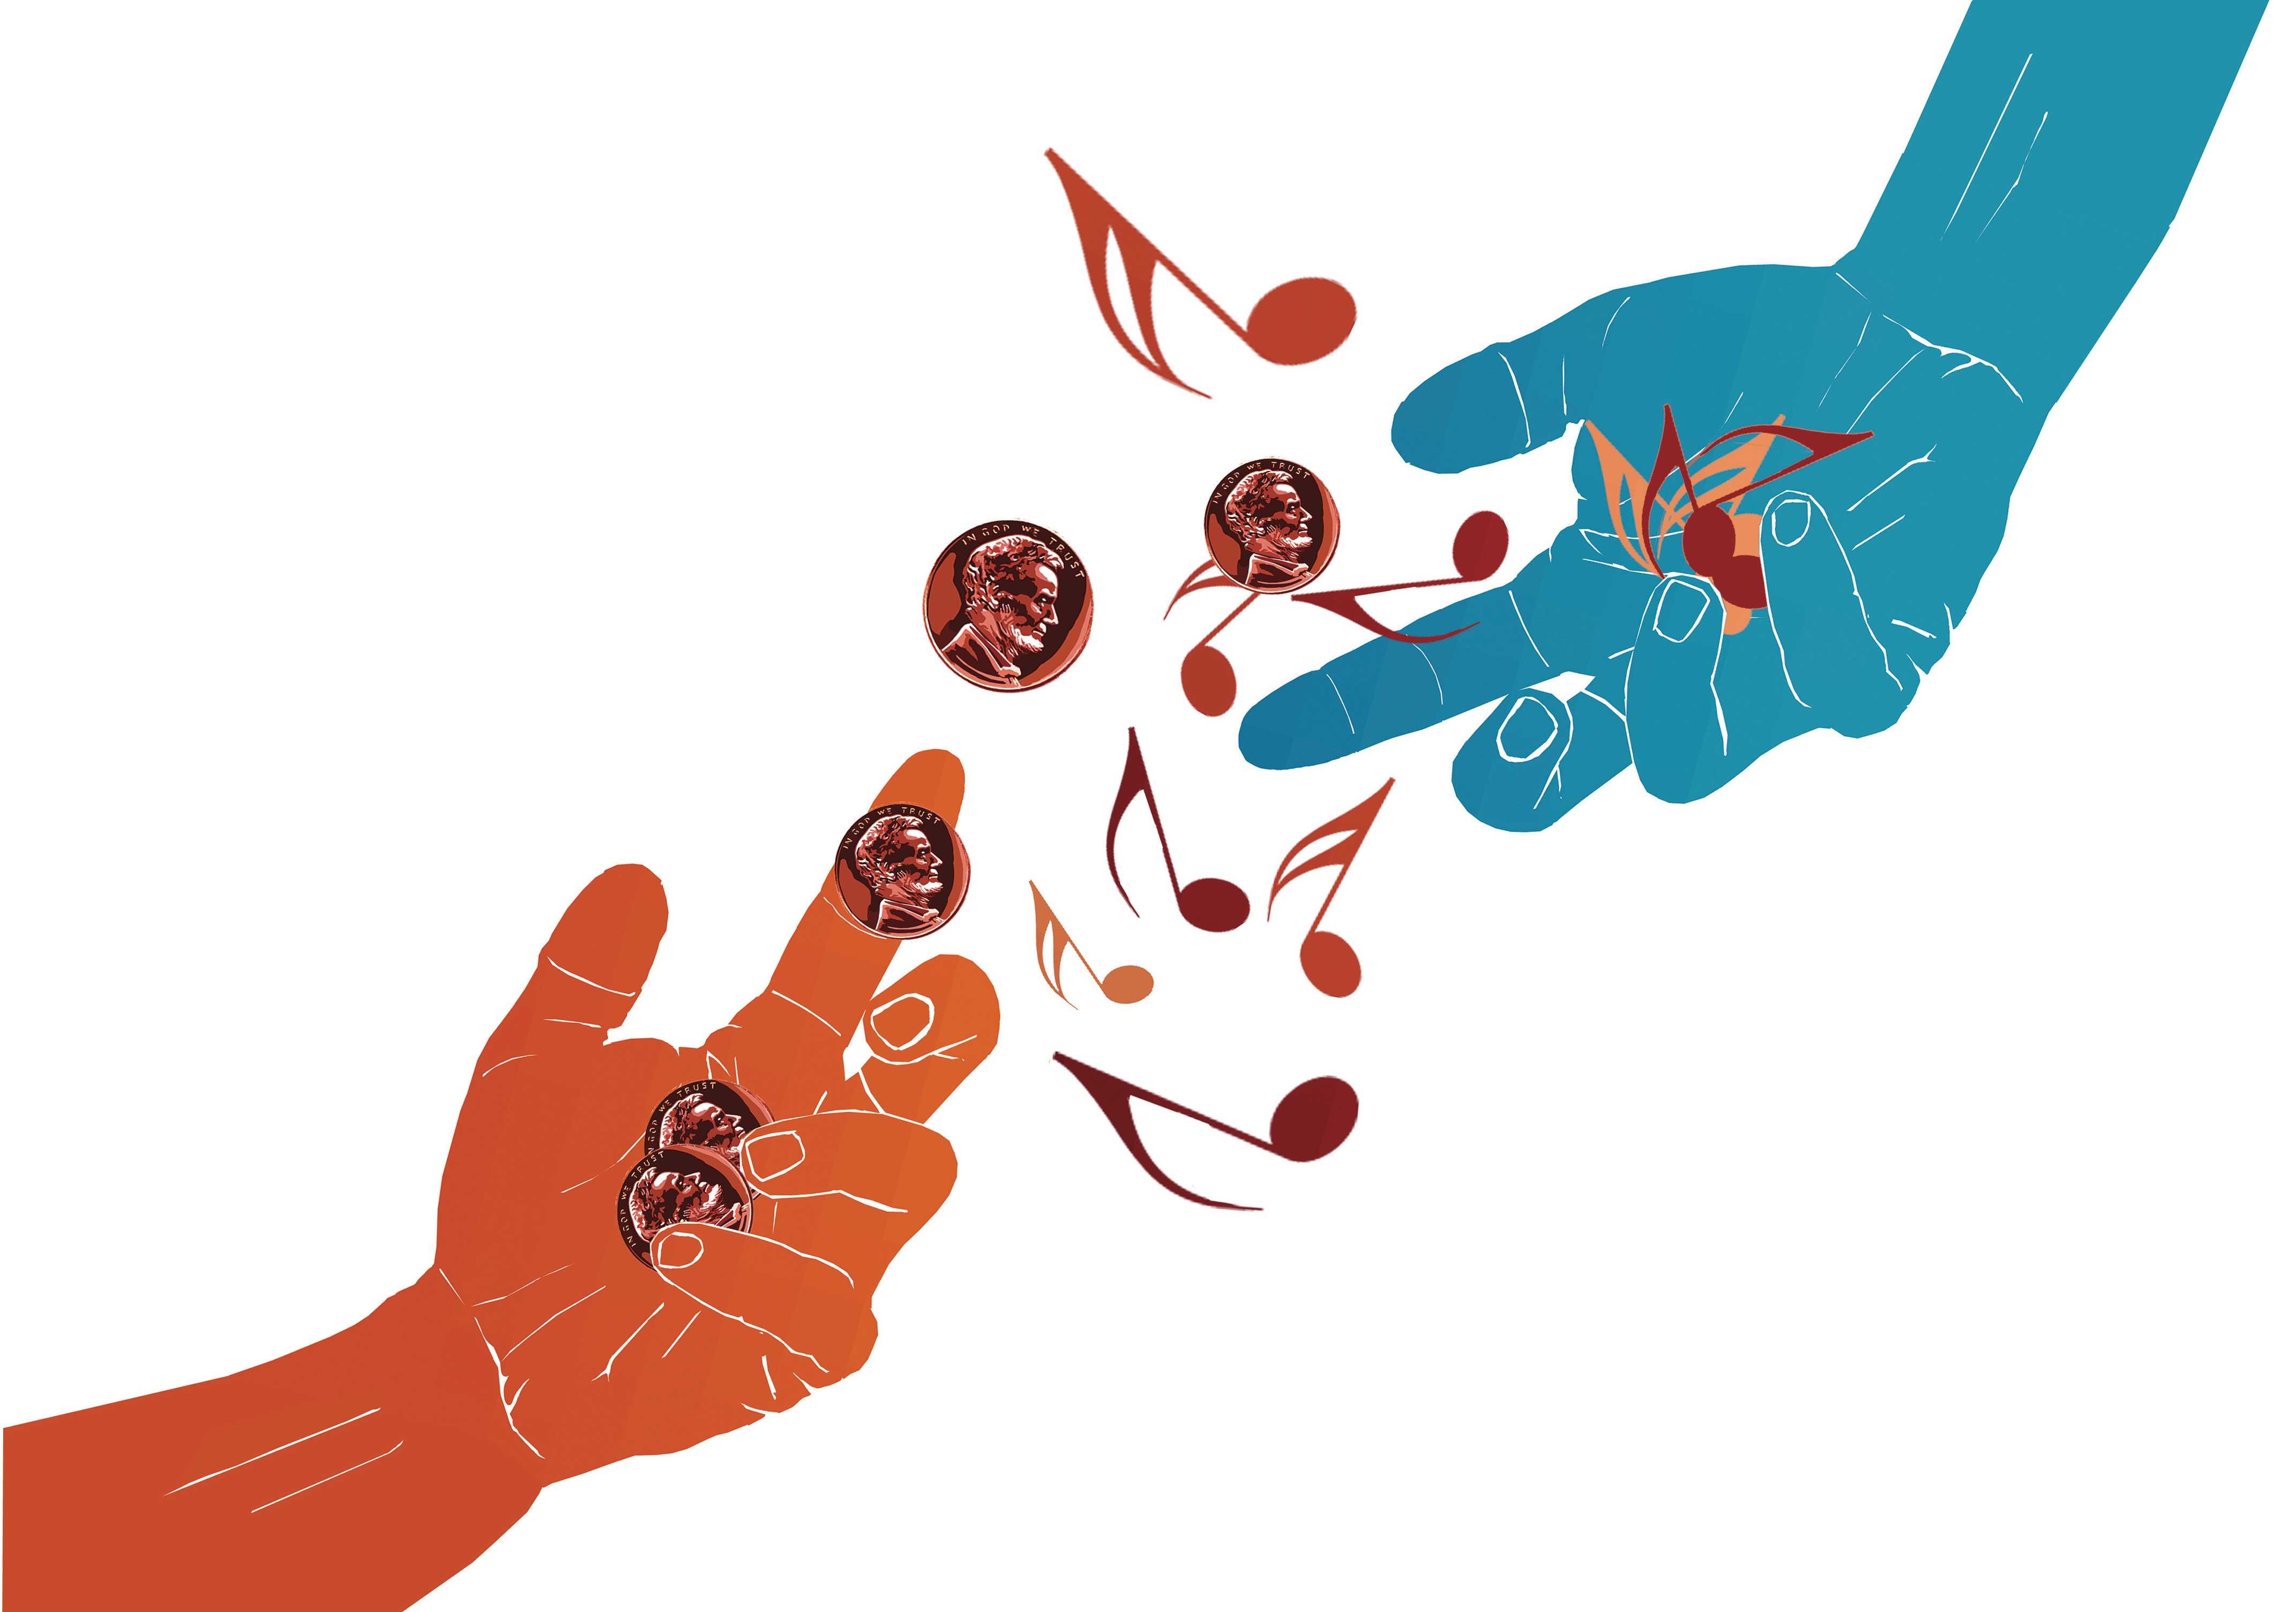 Illustration shows two hands exchanging pennies and music notes